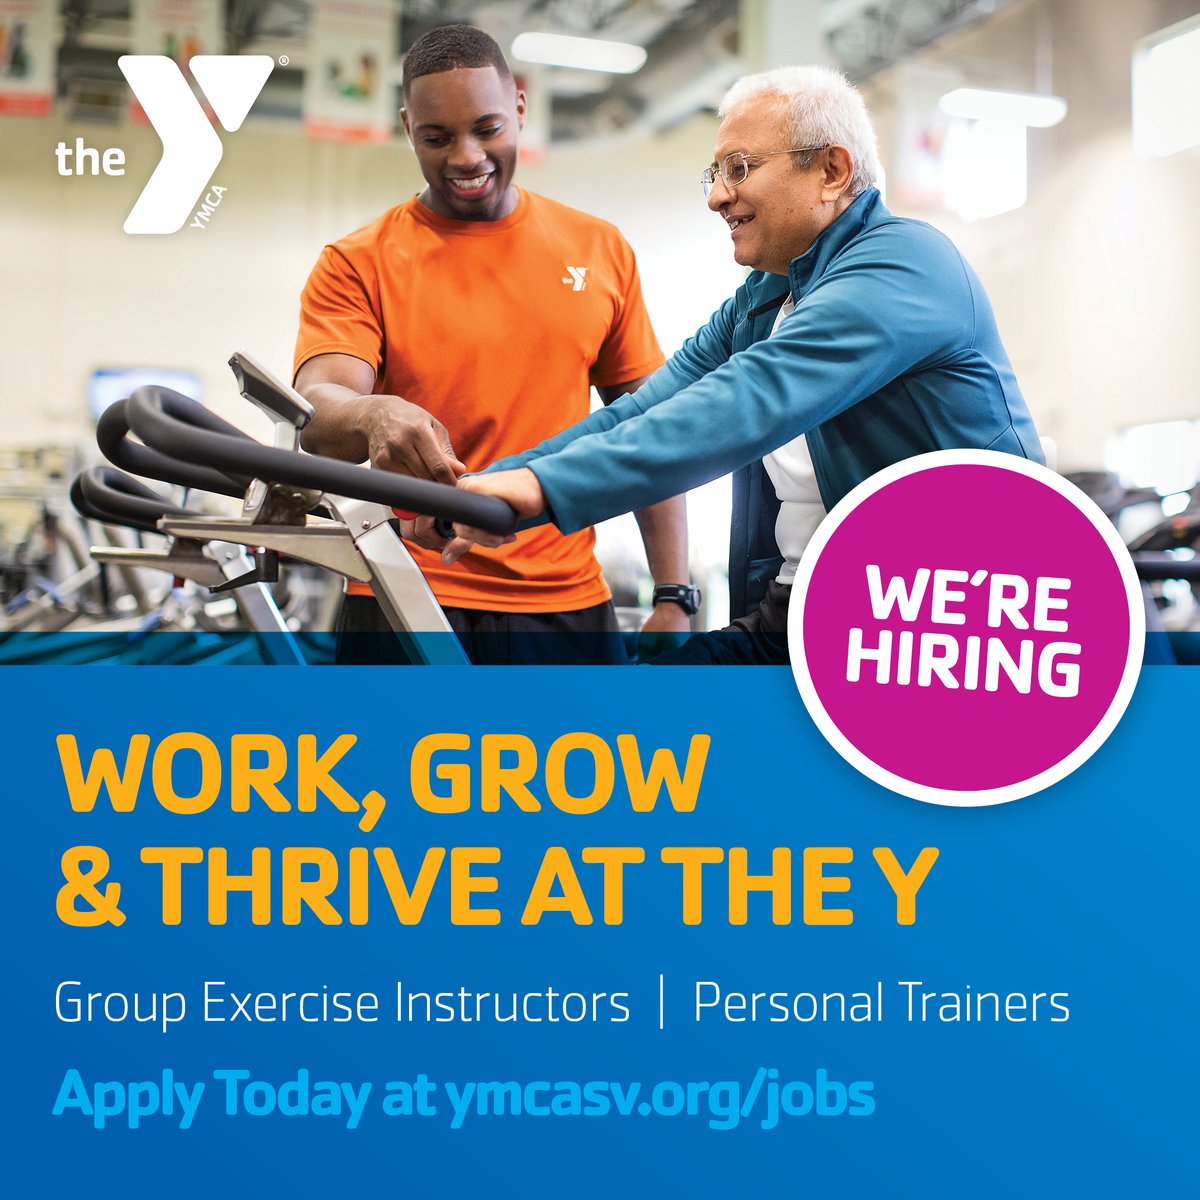 Is fitness your passion? Discover a job that lets you share your energy and passion with others. Come join the Y team! ymcasv.org/jobs